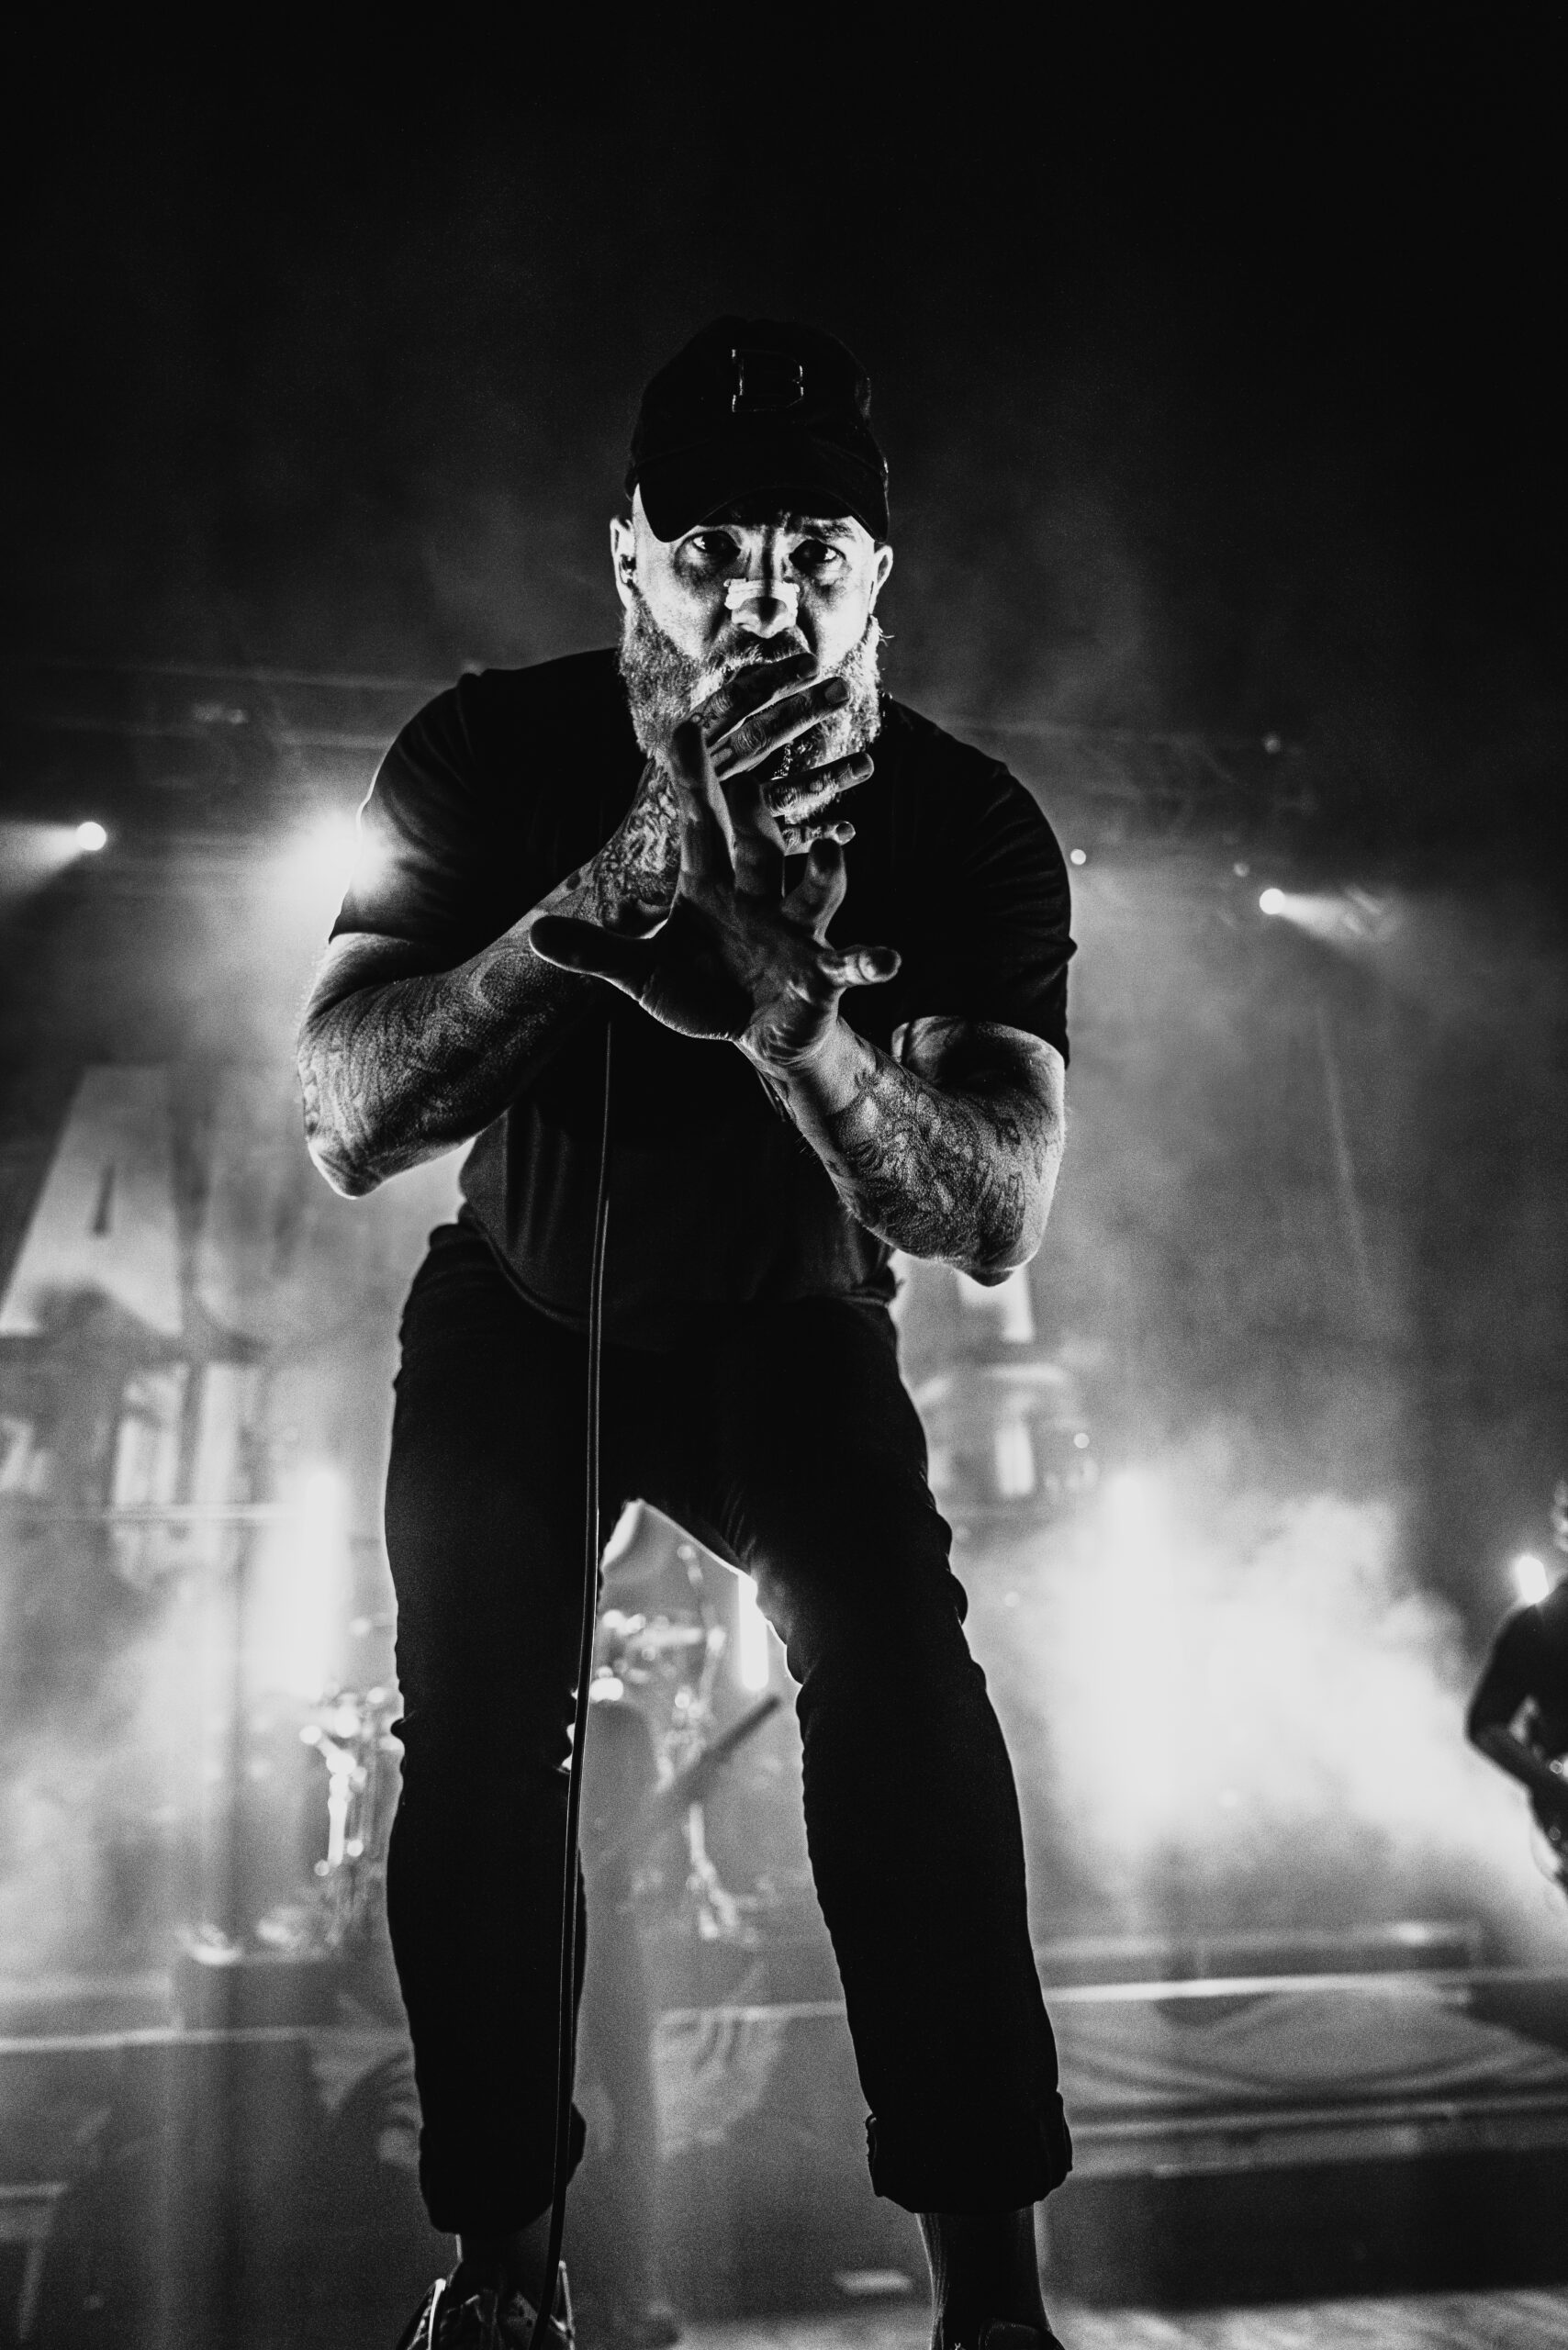 August Burns Red photo by Zak DeFreze for HM Magazine